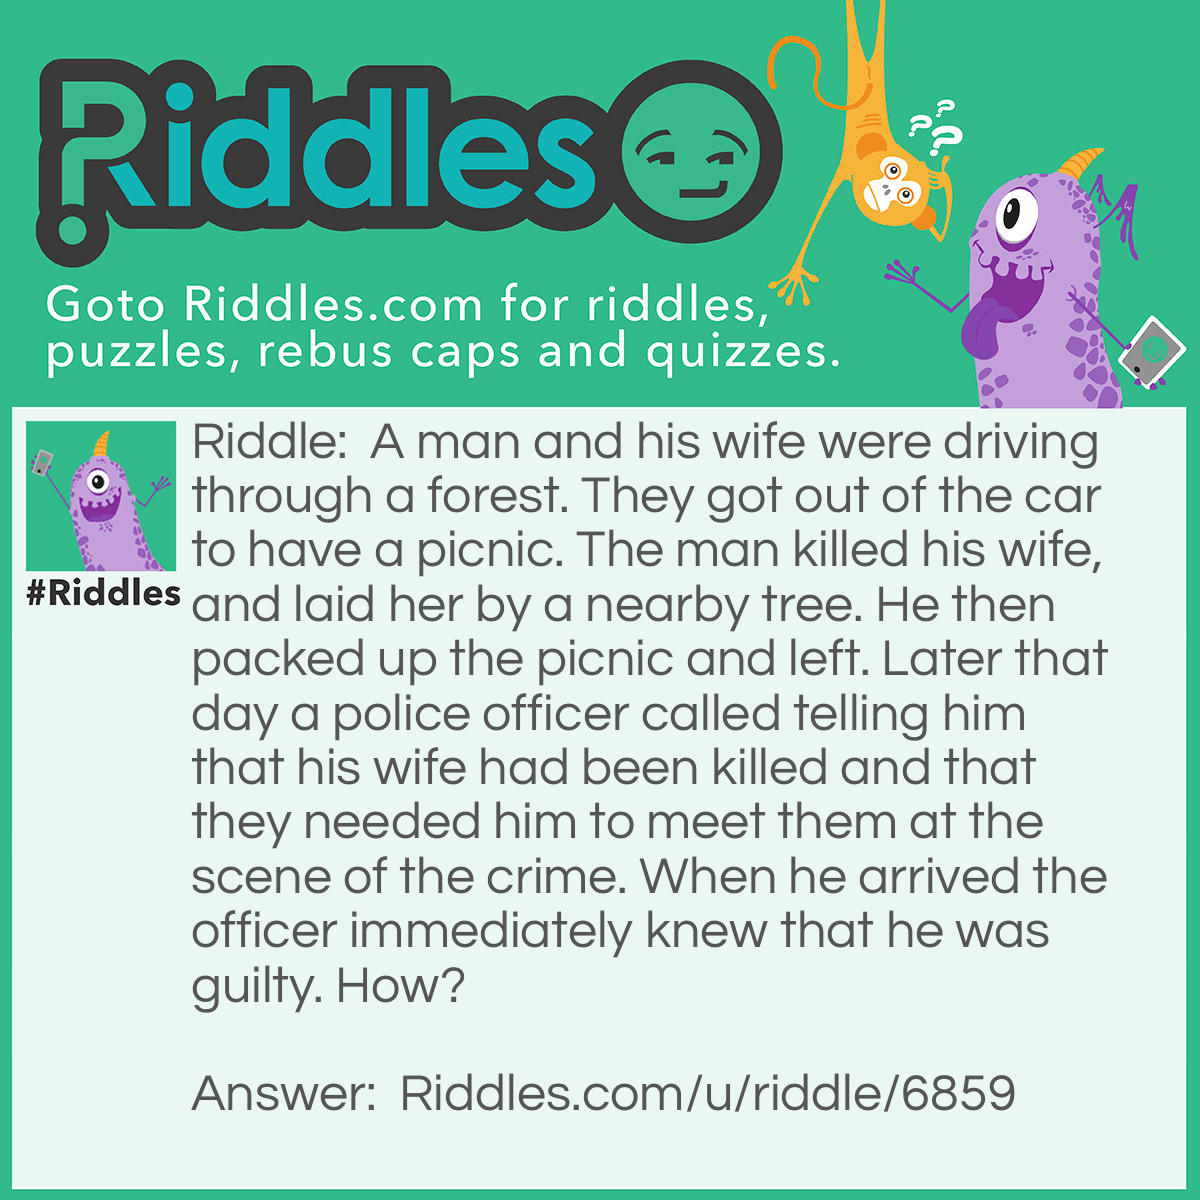 Riddle: A man and his wife were driving through a forest. They got out of the car to have a picnic. The man killed his wife, and laid her by a nearby tree. He then packed up the picnic and left. Later that day a police officer called telling him that his wife had been killed and that they needed him to meet them at the scene of the crime. When he arrived the officer immediately knew that he was guilty. How? Answer: The officer did not tell the man where his wife had been killed, so when he showed up, they knew it wa him.